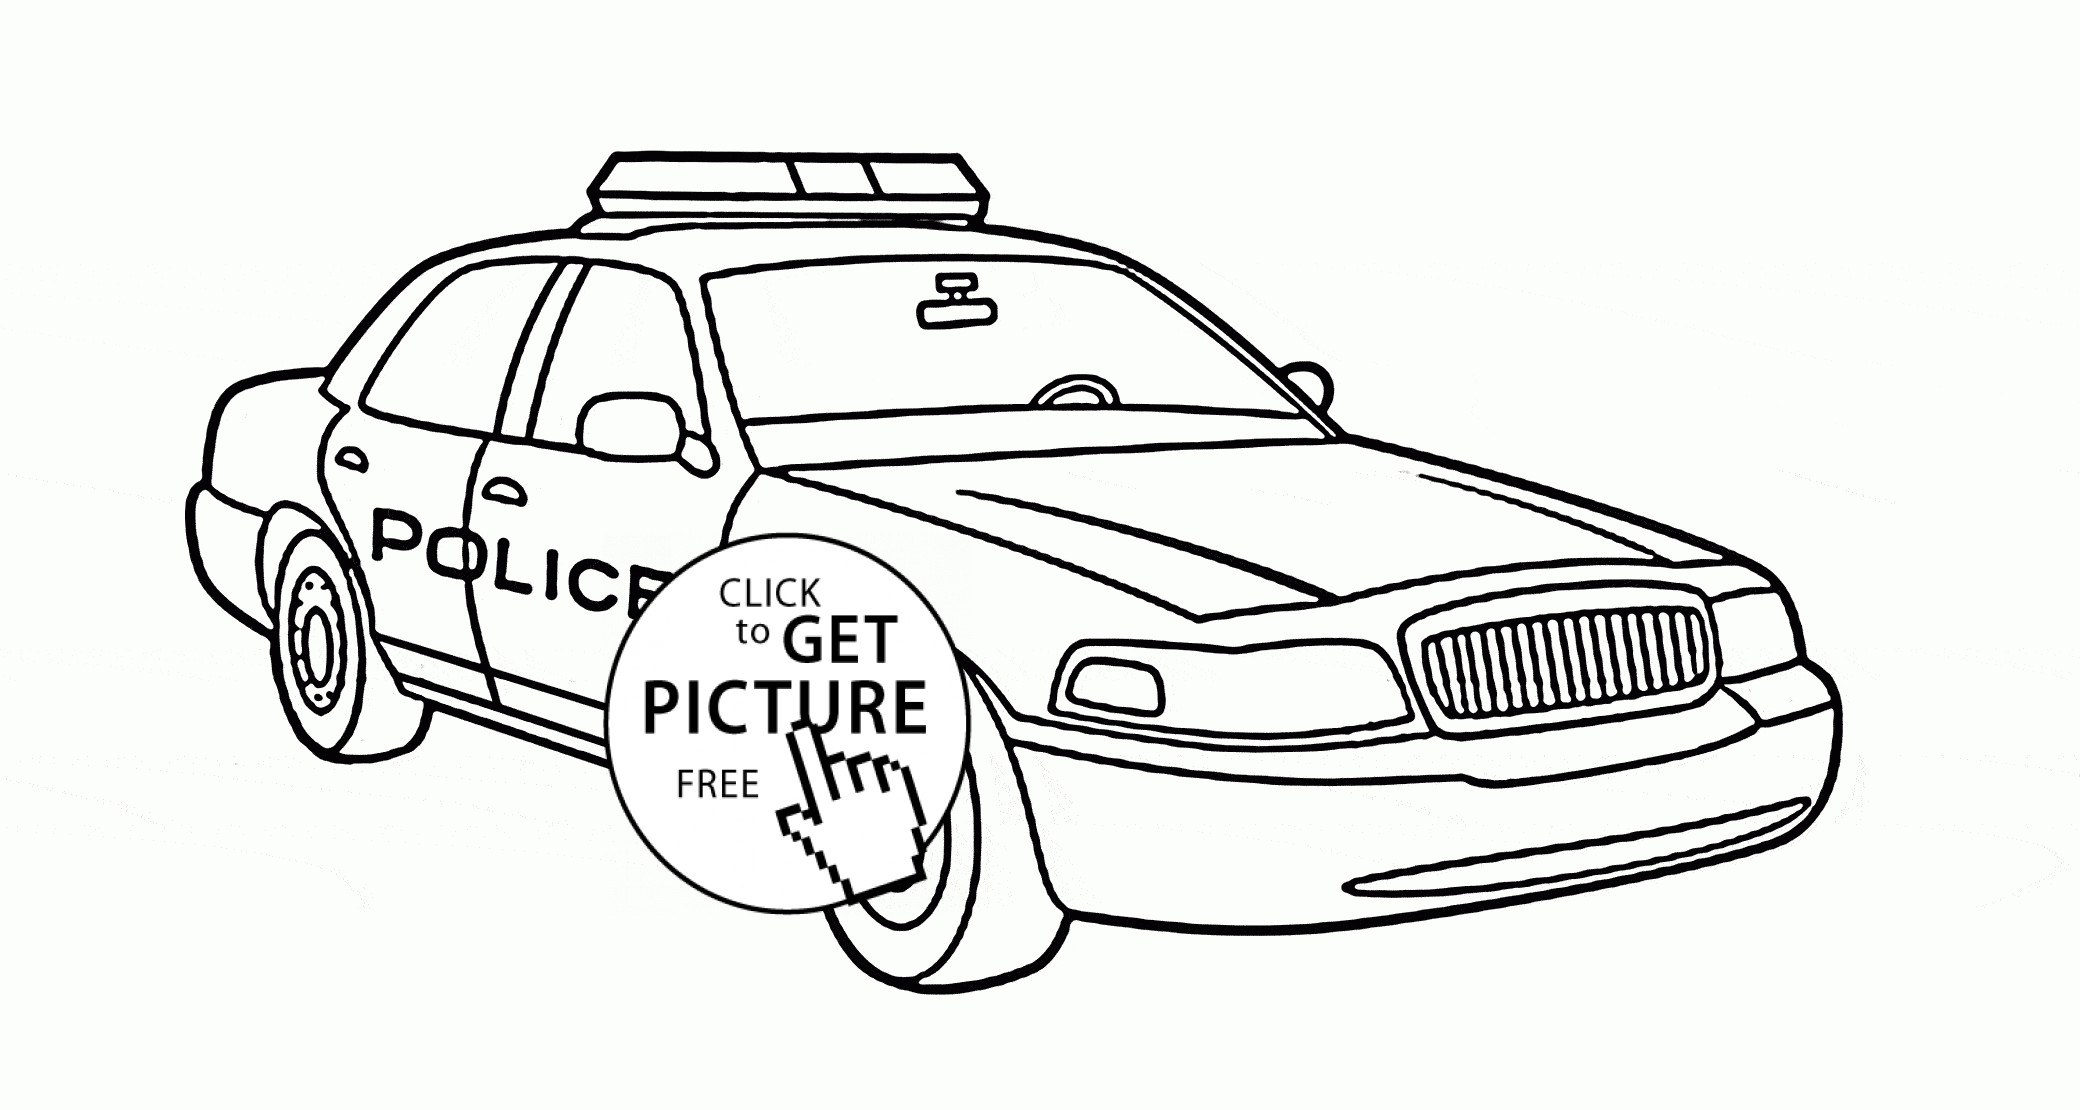 Coloring Pages For Boys Police Car
 Real Police Car coloring page for kids transportation